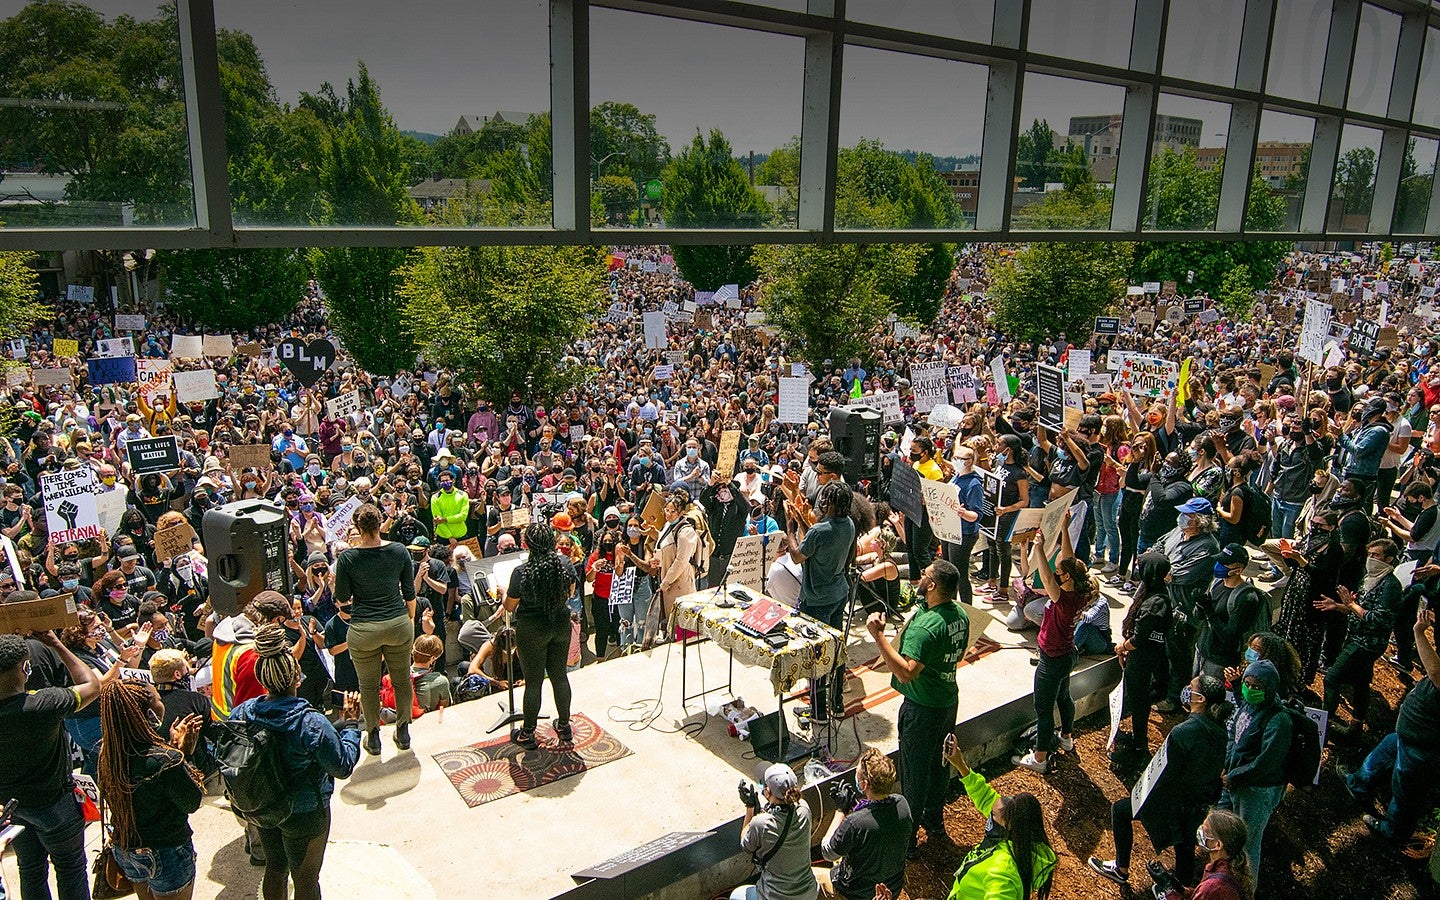 A rally in support of the Black Lives Matter movement held in downtown Eugene, Oregon in May 2020. Photo by Kimberly Harris.